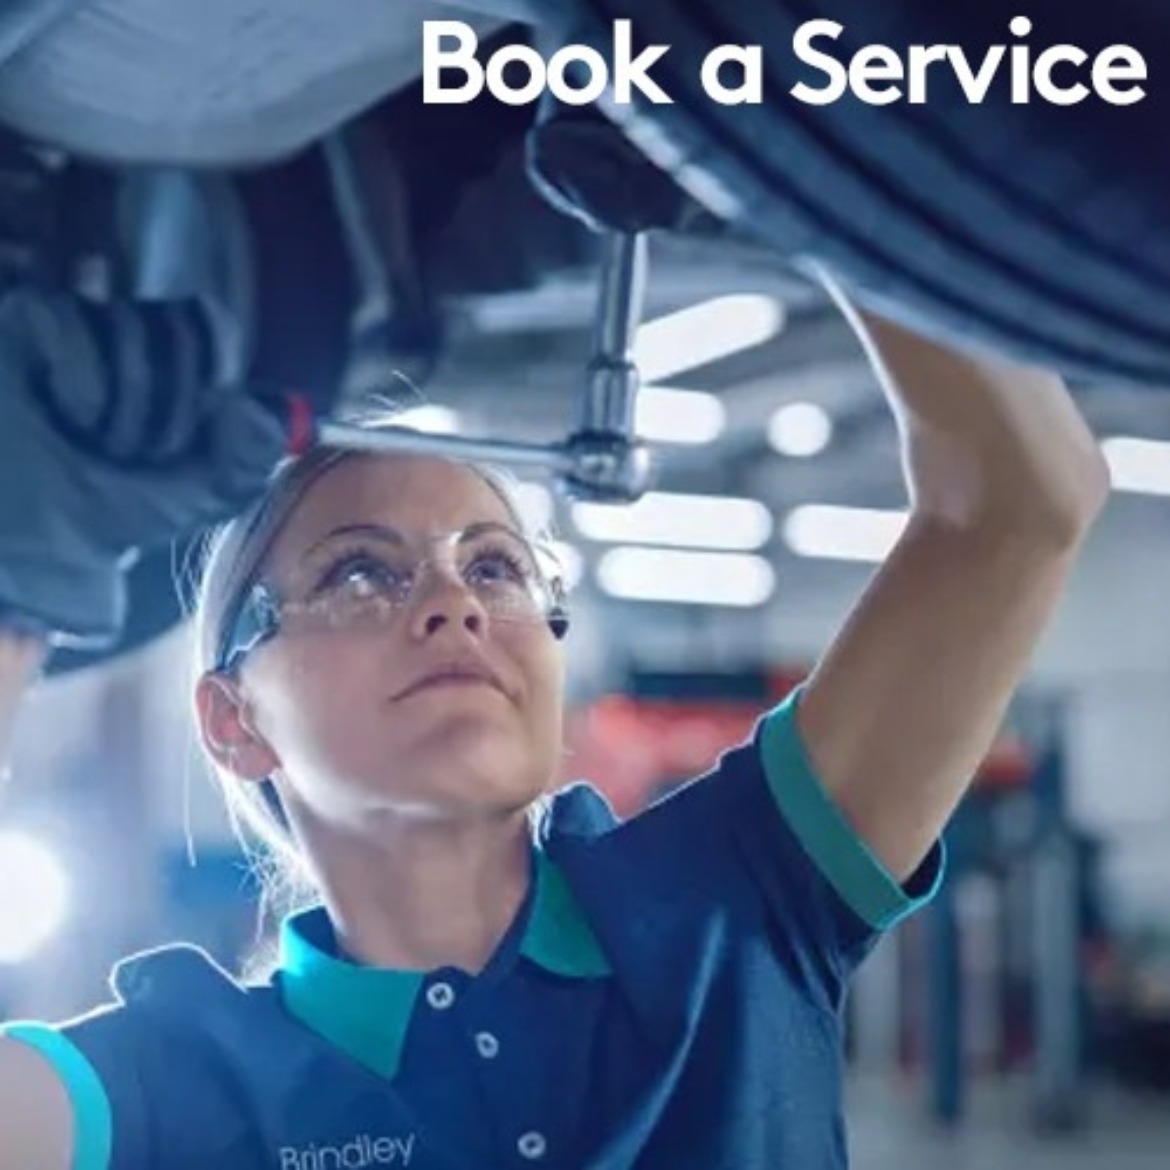 Book a Service at Maxus in Louth, Lincolnshire